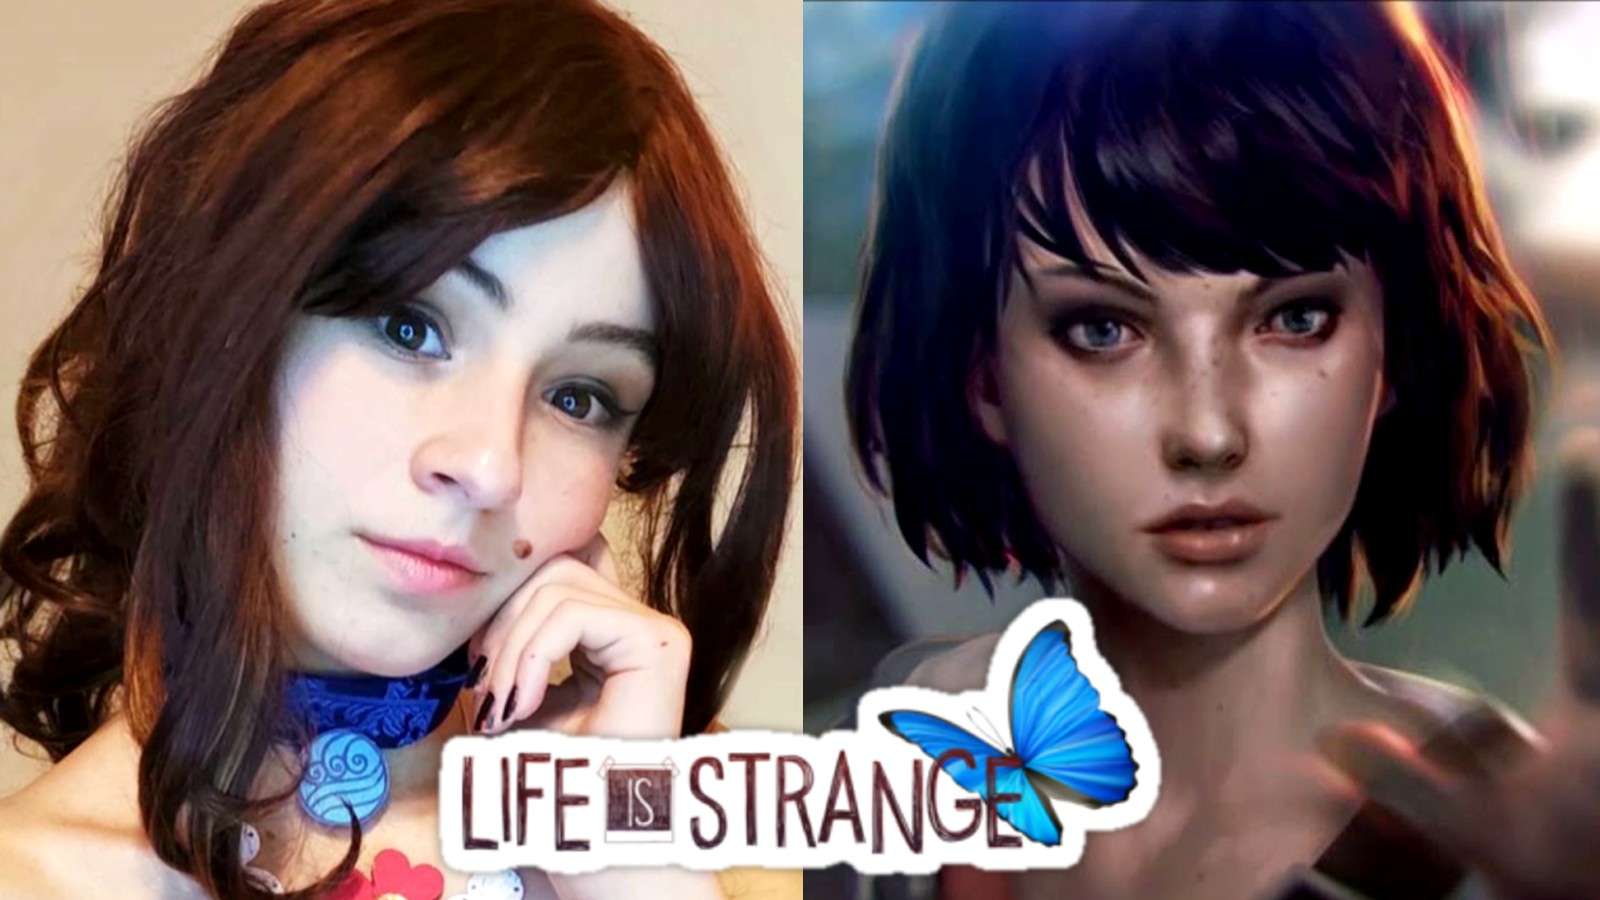 Cosplayer alexya.cos next to Max Caulfield from Life is Strange with the Life is Strange logo